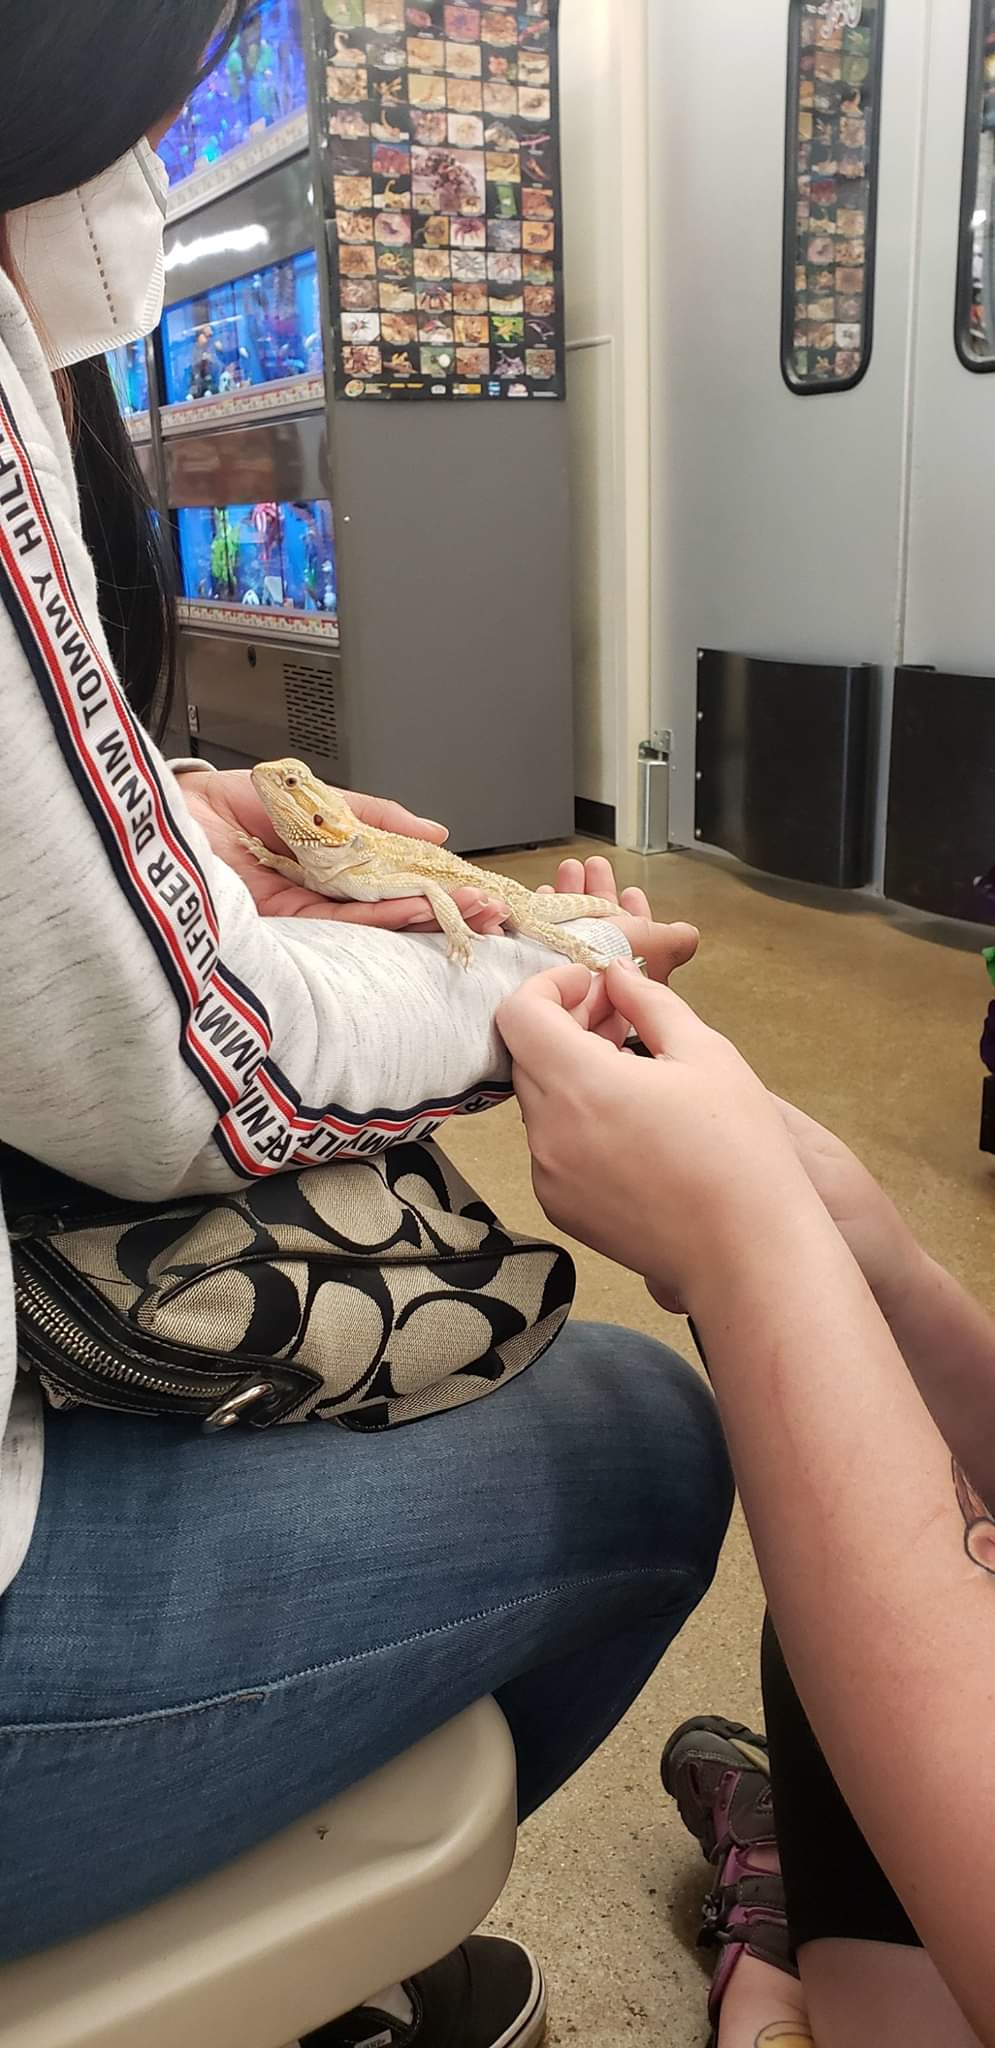 A reptile getting his nails professionally trimmed.